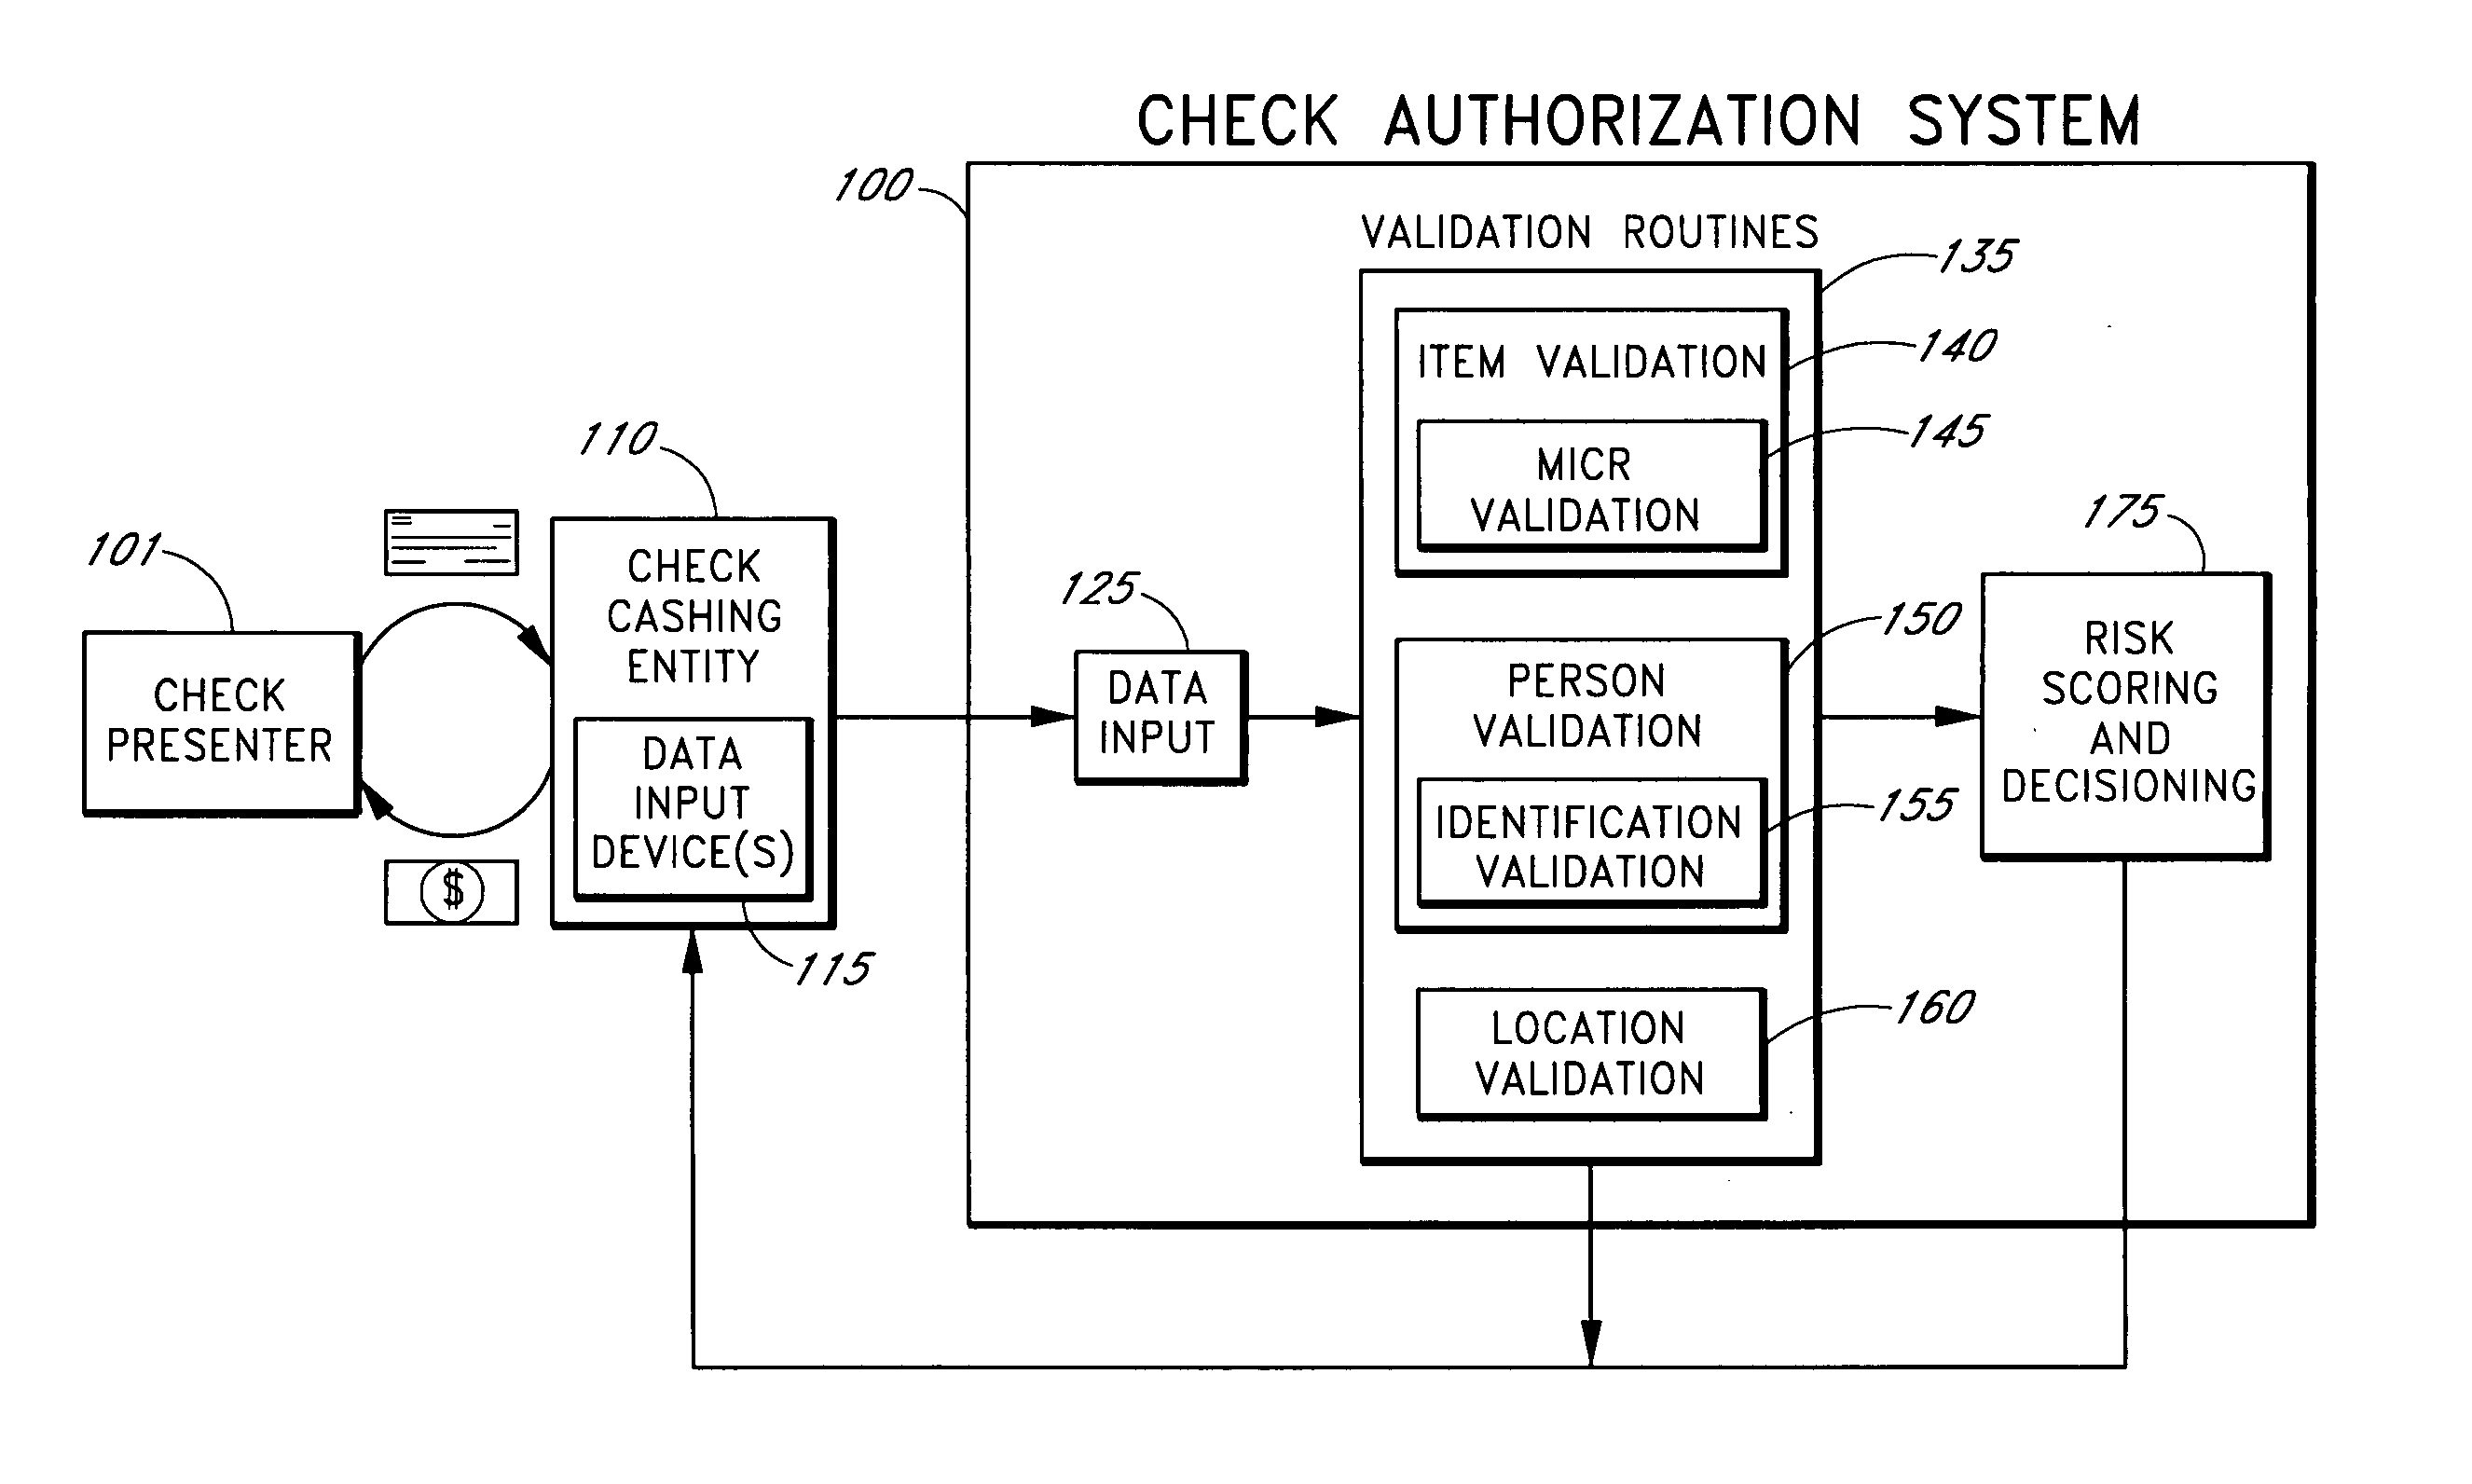 Systems and methods for identifying payor location based on transaction data